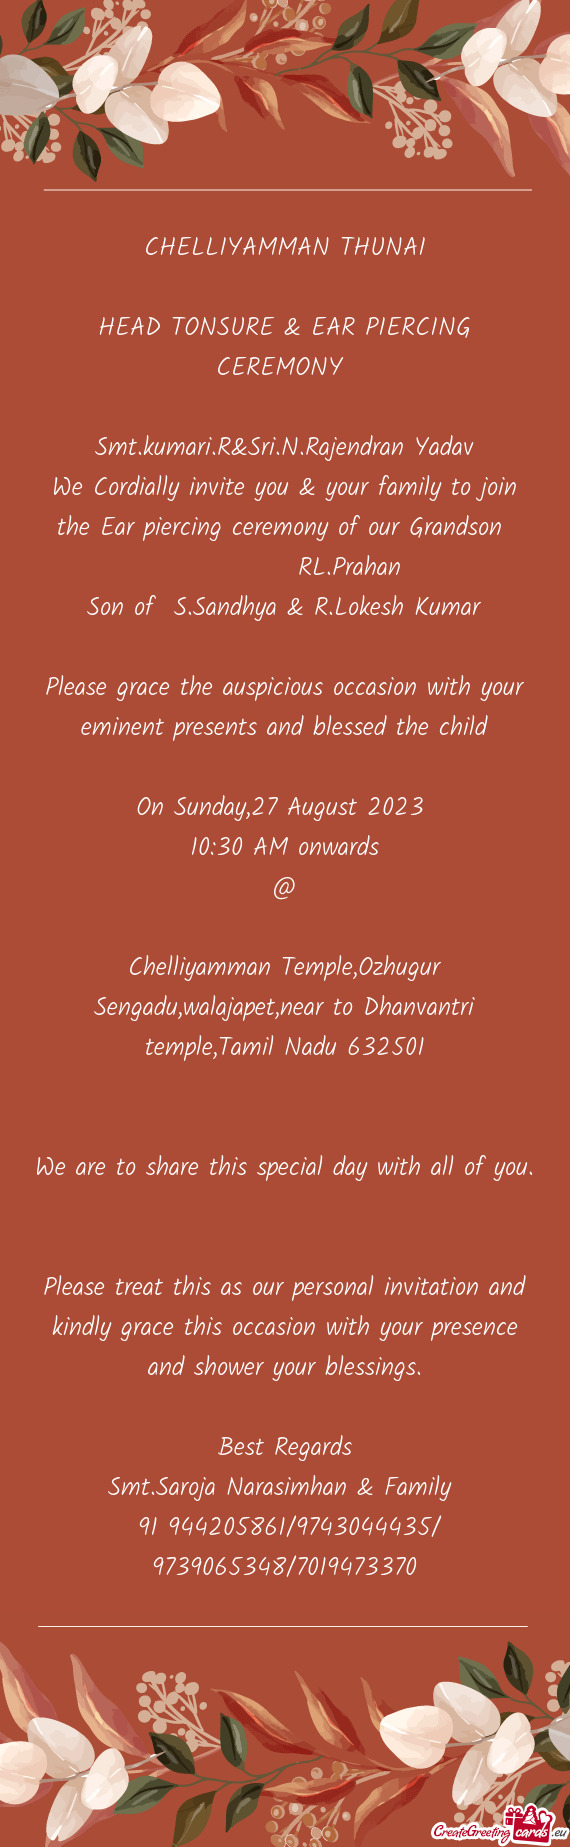 We Cordially invite you & your family to join the Ear piercing ceremony of our Grandson